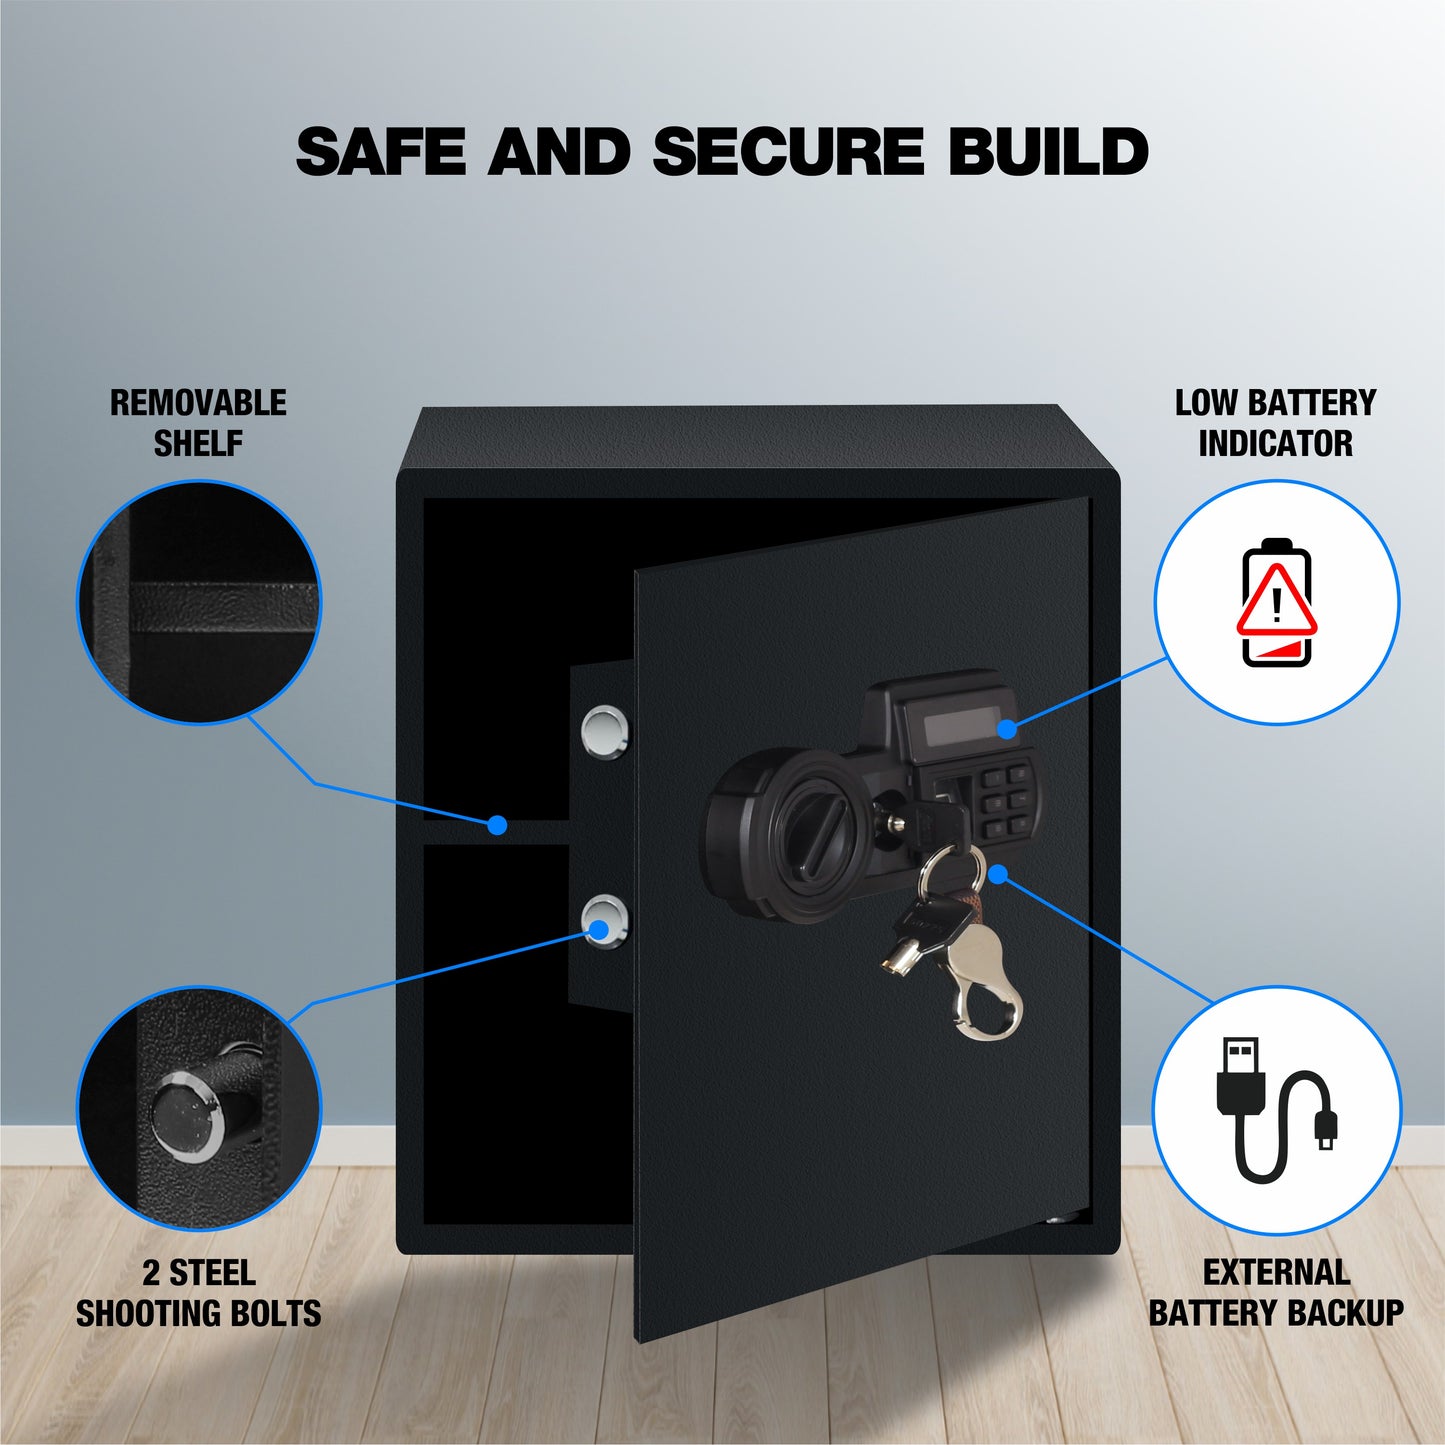 Ozone Biometric Safe for Homes & Offices | 3-way Access | Fingerprint, Password & Emergency Key (44.1 Ltrs.)